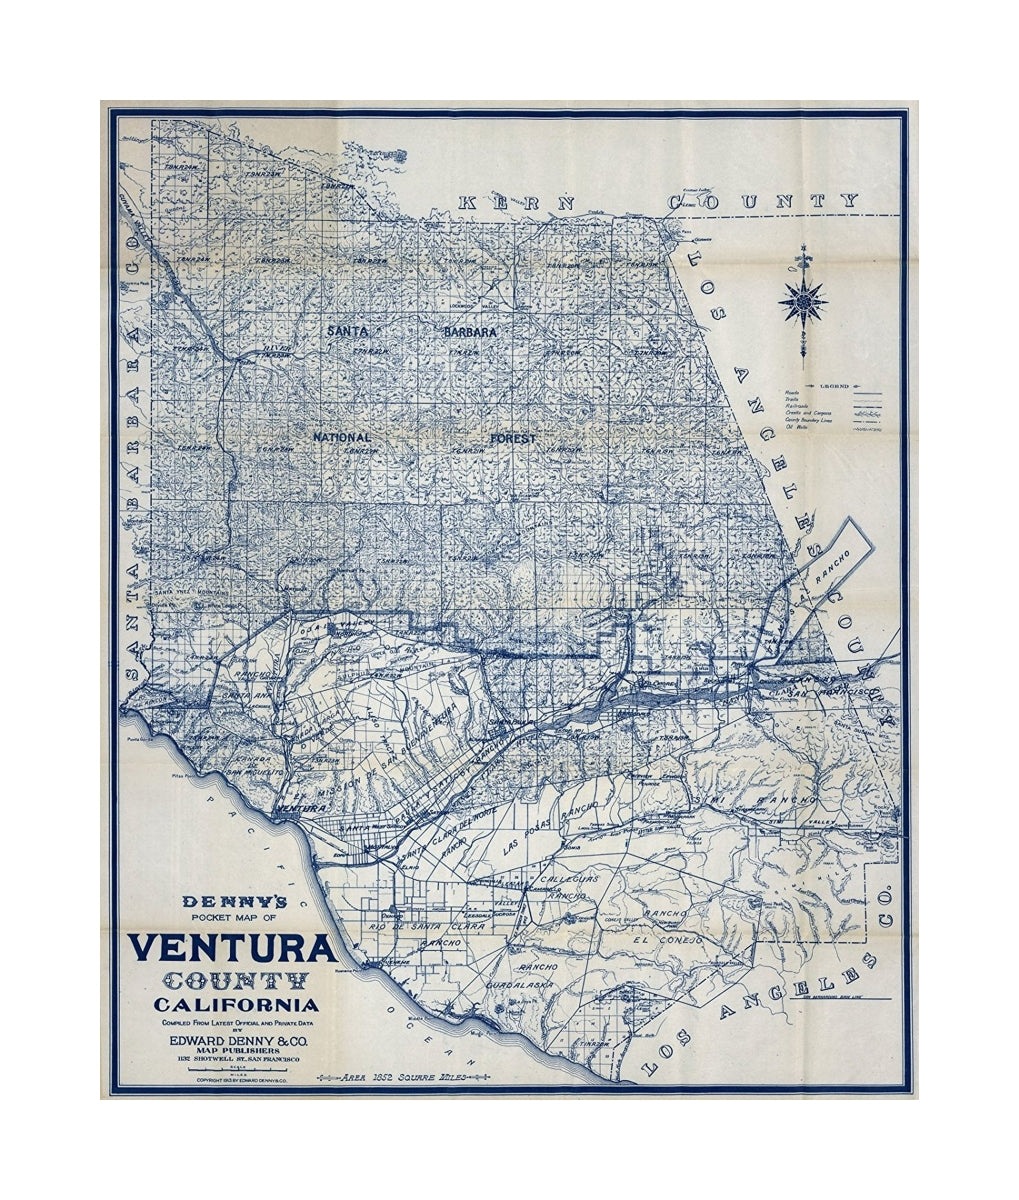 Denny's Pocket Map Of Ventura County, California. Compiled From Latest Official And Private Data By Edward Denny and Co. Map Publishers 1132 Shotwell St., San Francisco. Copyright 1913 By Edward Denny and Co., Denny's Pocket Map Of Ventura County, Califo